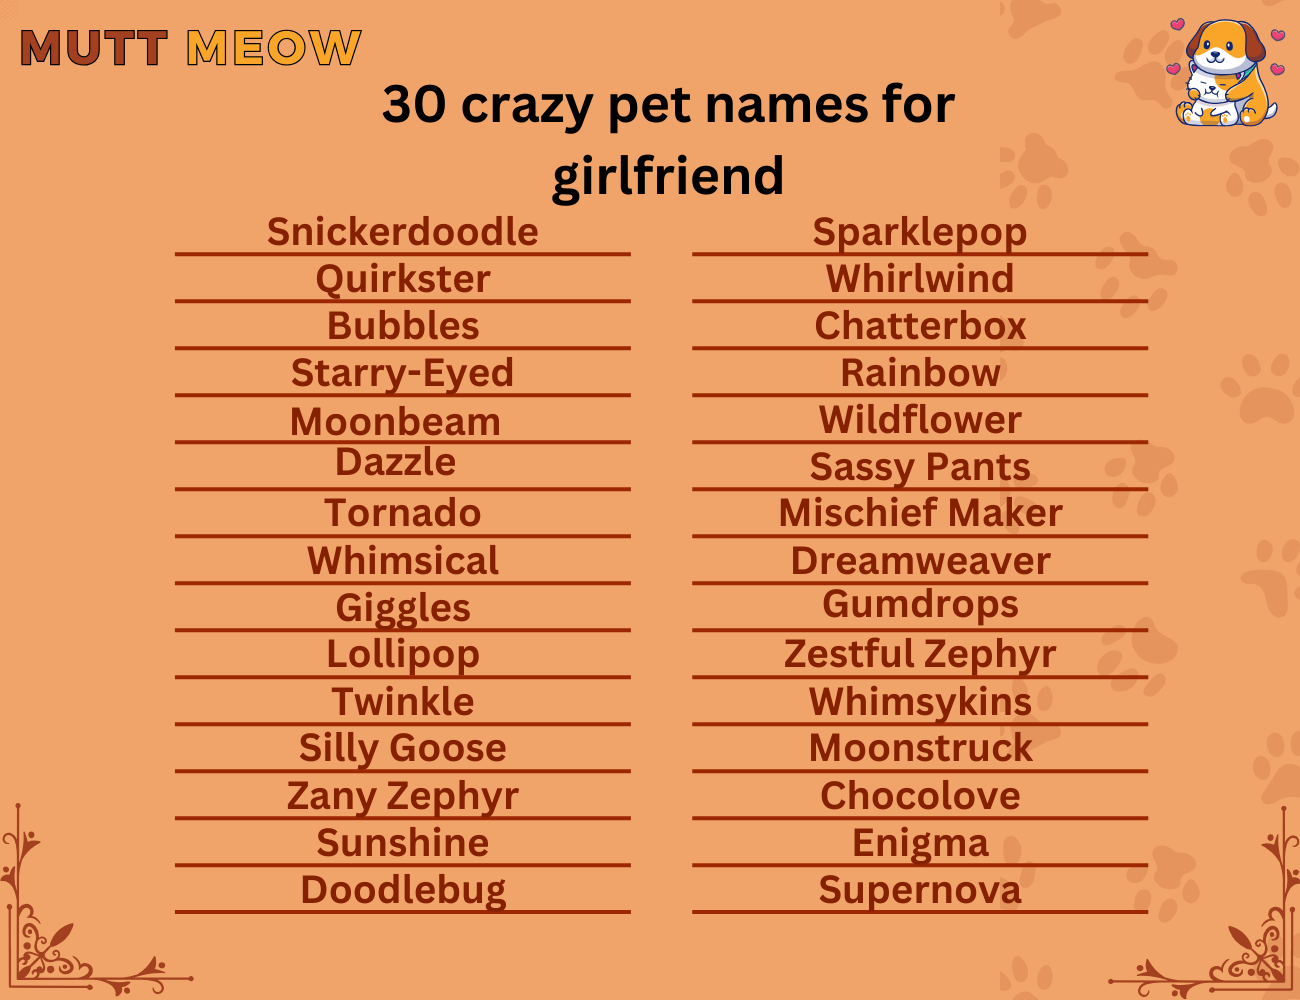 30 crazy pet names for girlfriend